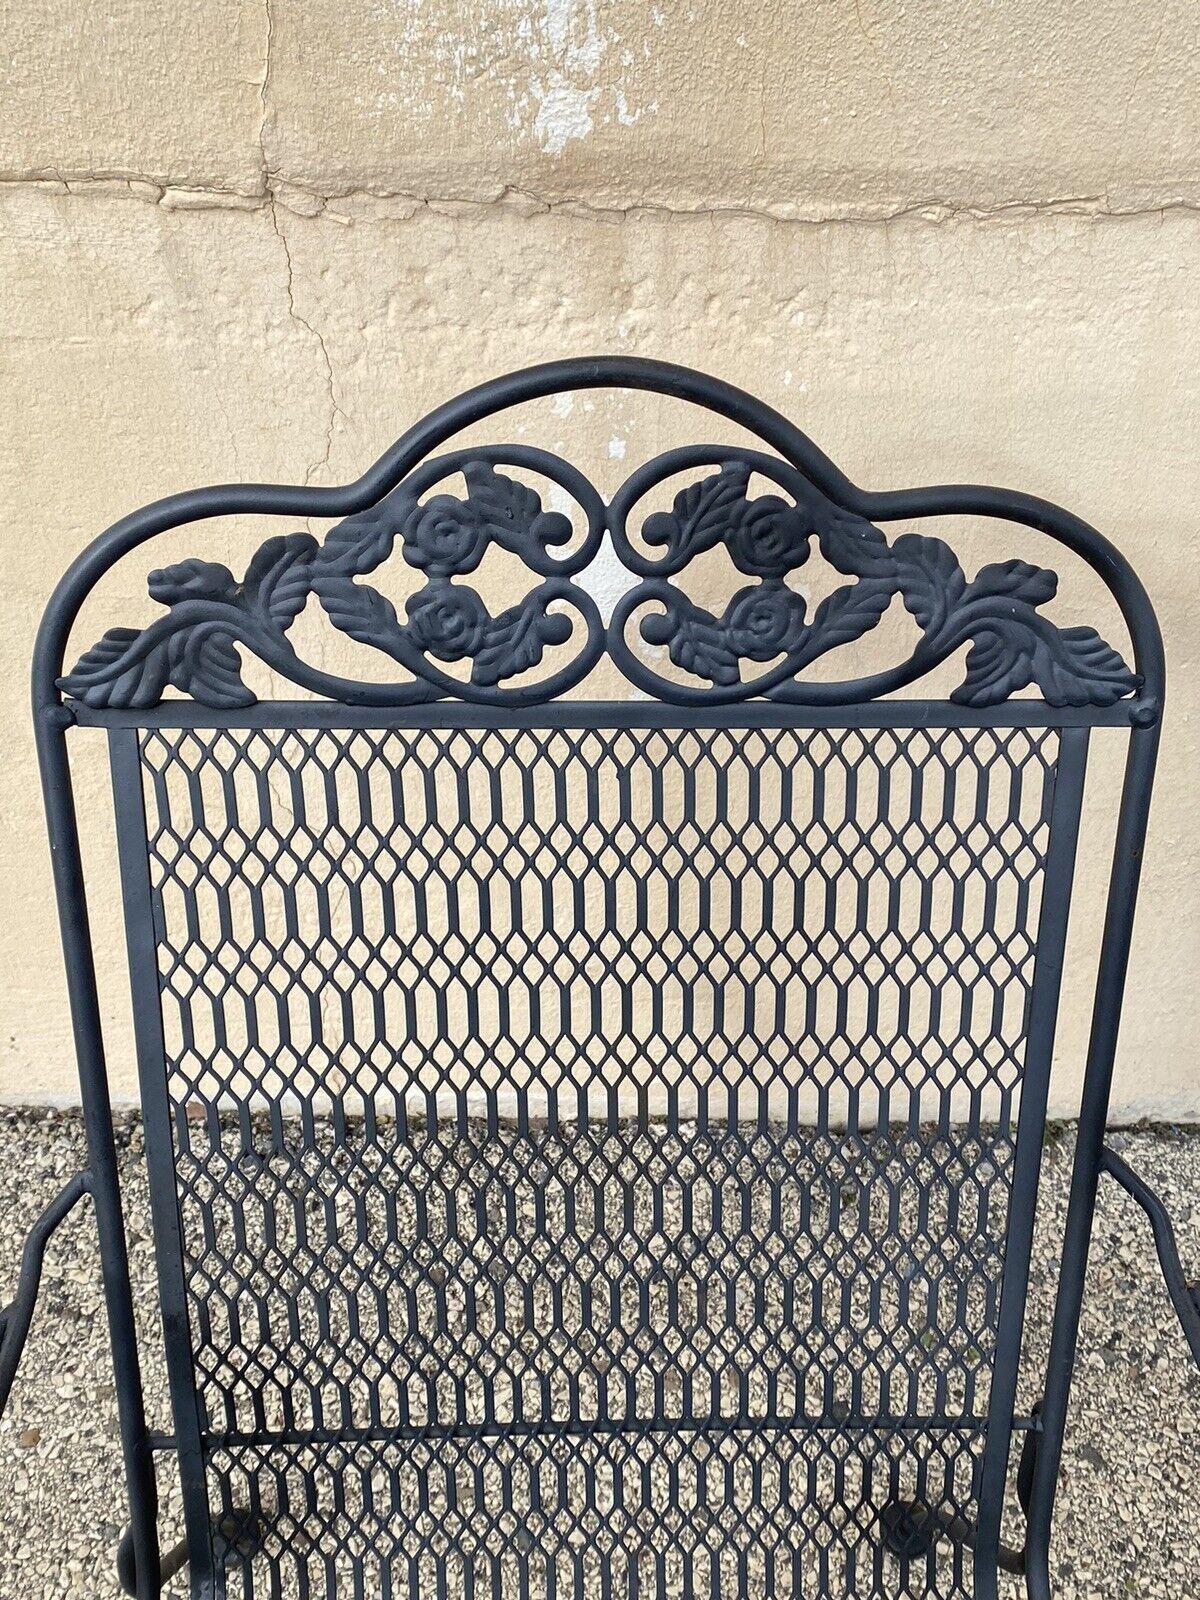 Vintage Wrought Iron Rose and Vine Pattern Garden Patio Chairs - 7 Pc Set In Good Condition For Sale In Philadelphia, PA